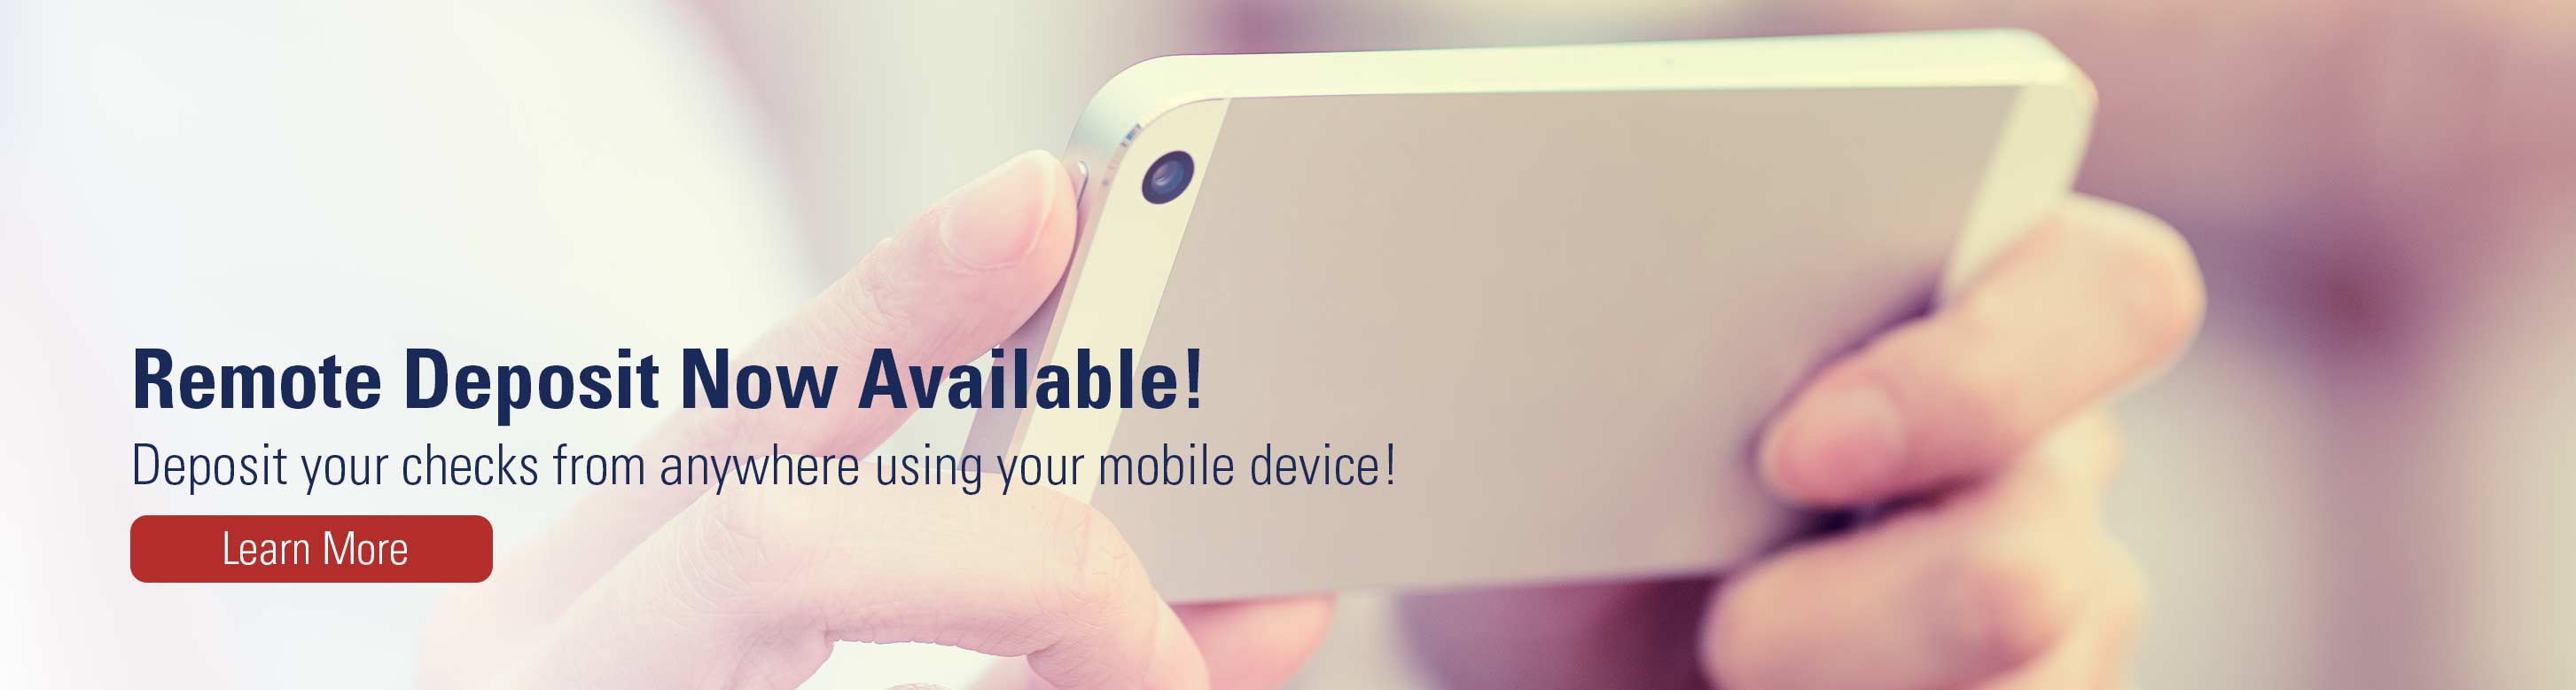 Remote deposit now available! Deposit your checks from anywhere using your mobile device! Learn more.